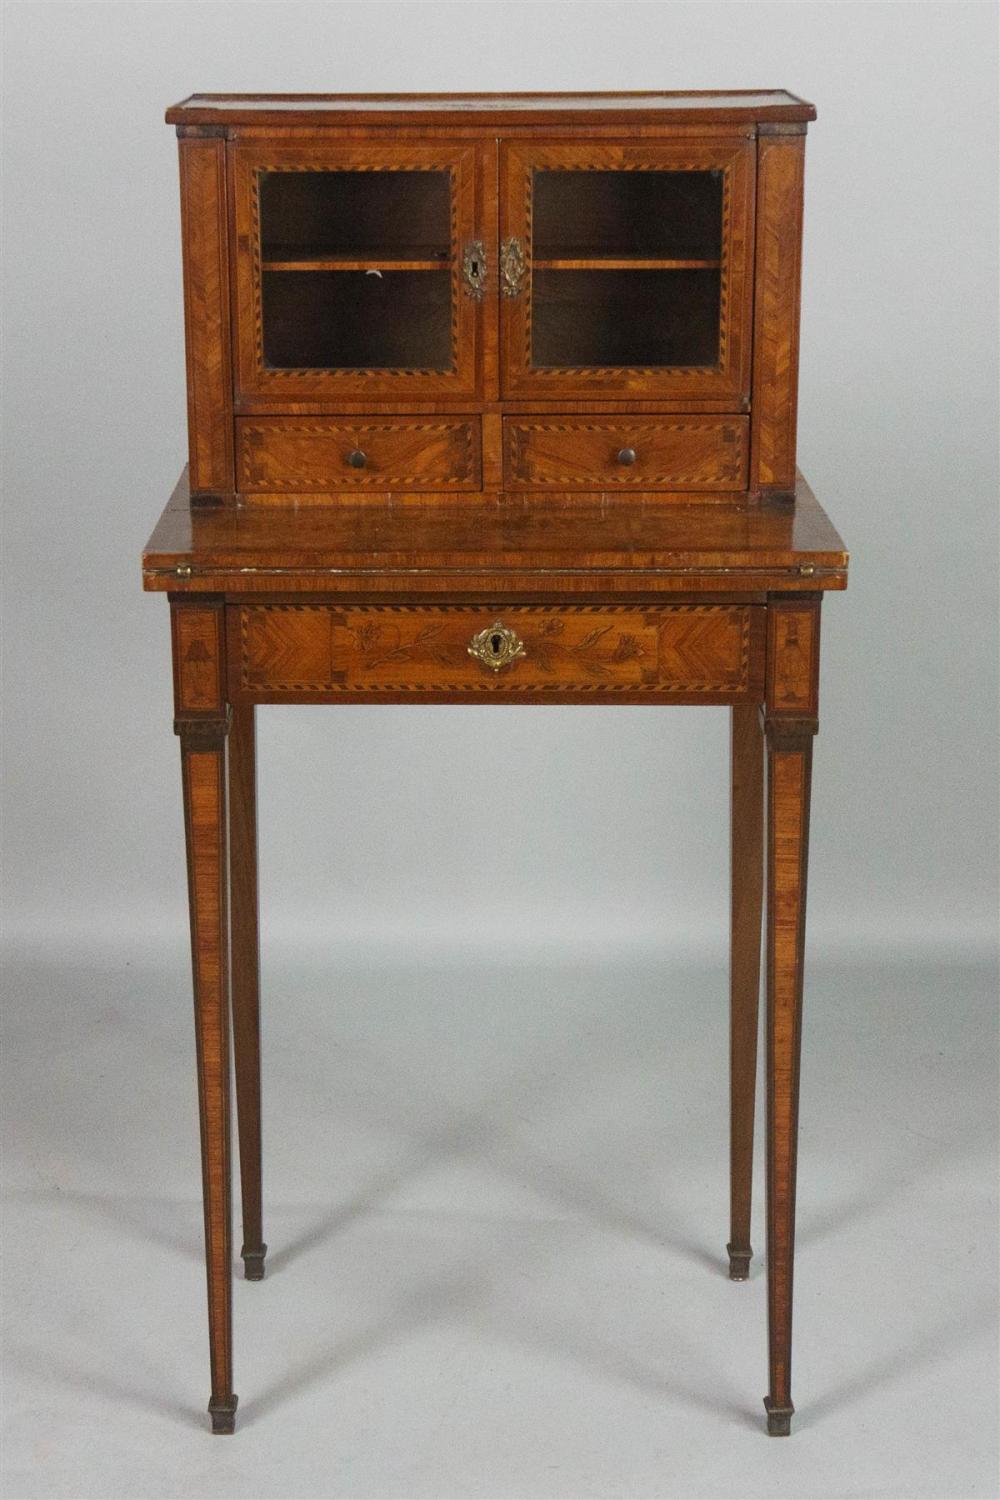 CONTINENTAL LOUIS XVI STYLE MARQUETRY 33aad9